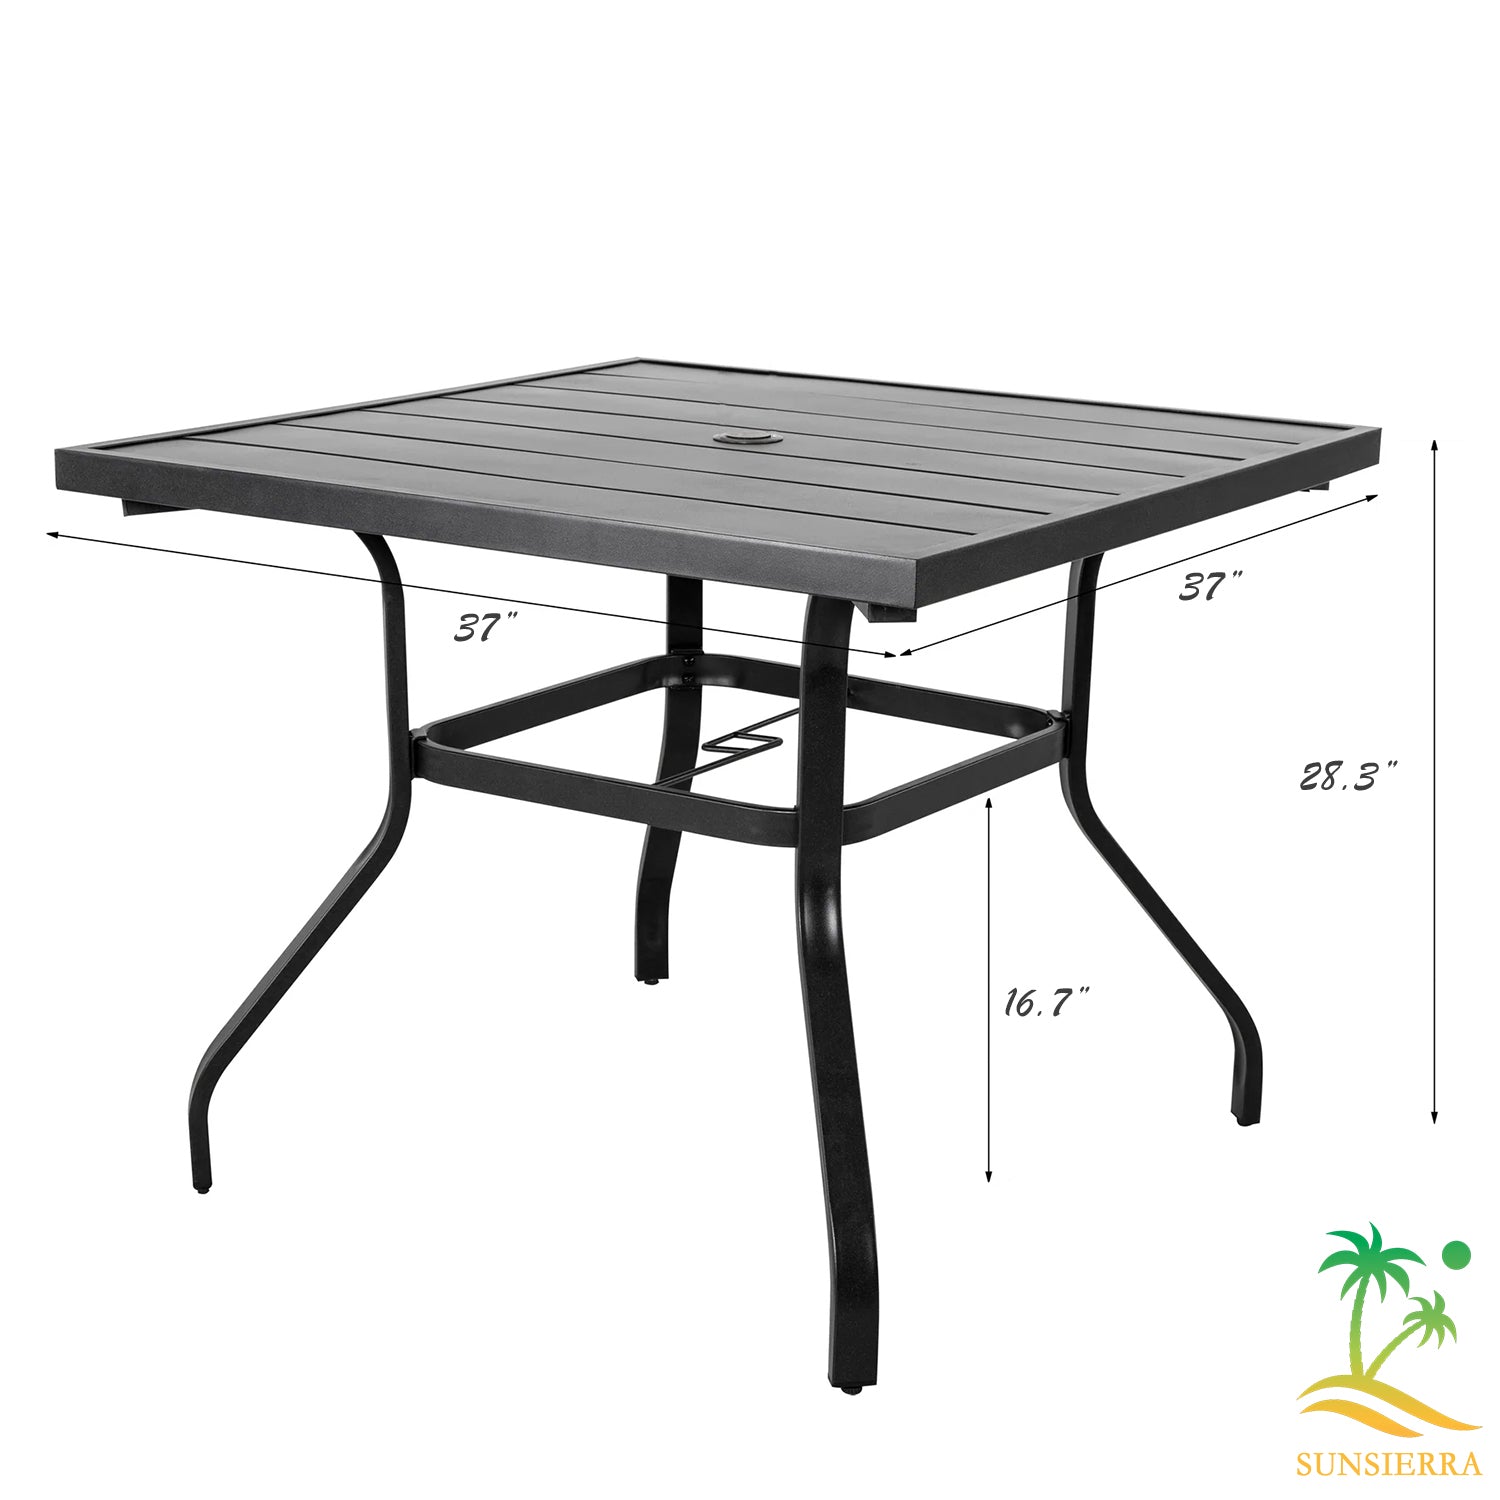 SunSierra Outdoor Square Dining Table, Patio Table with Umbrella Hole